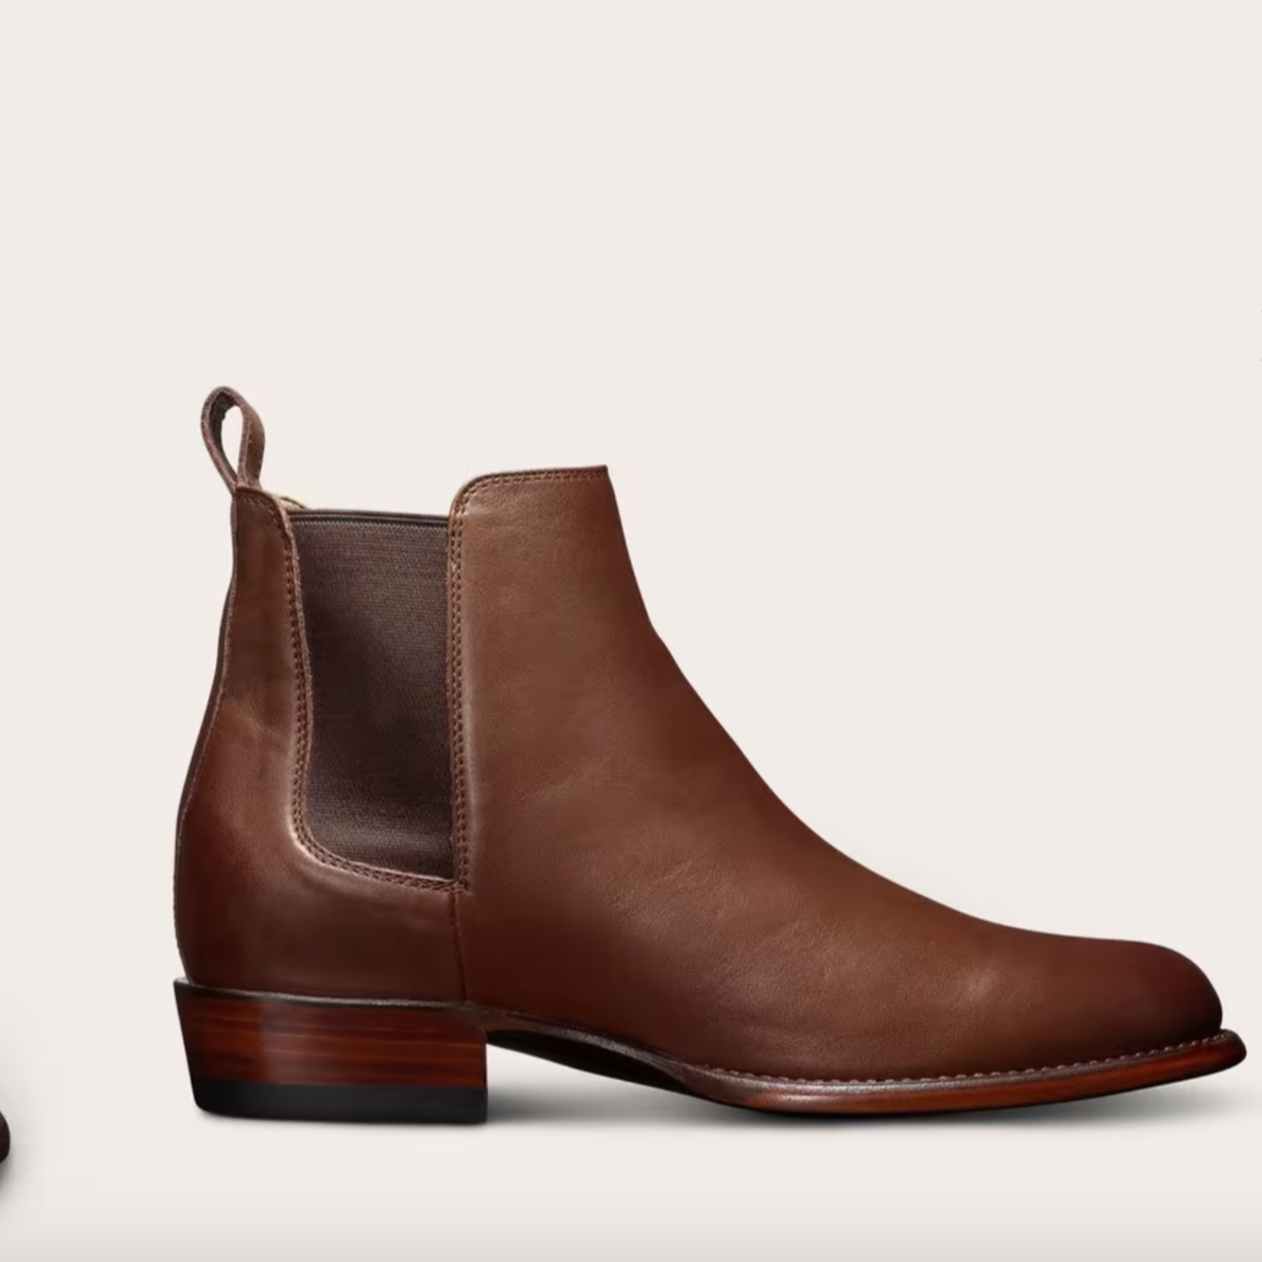 Tecovas The Chance Chelsea Boots